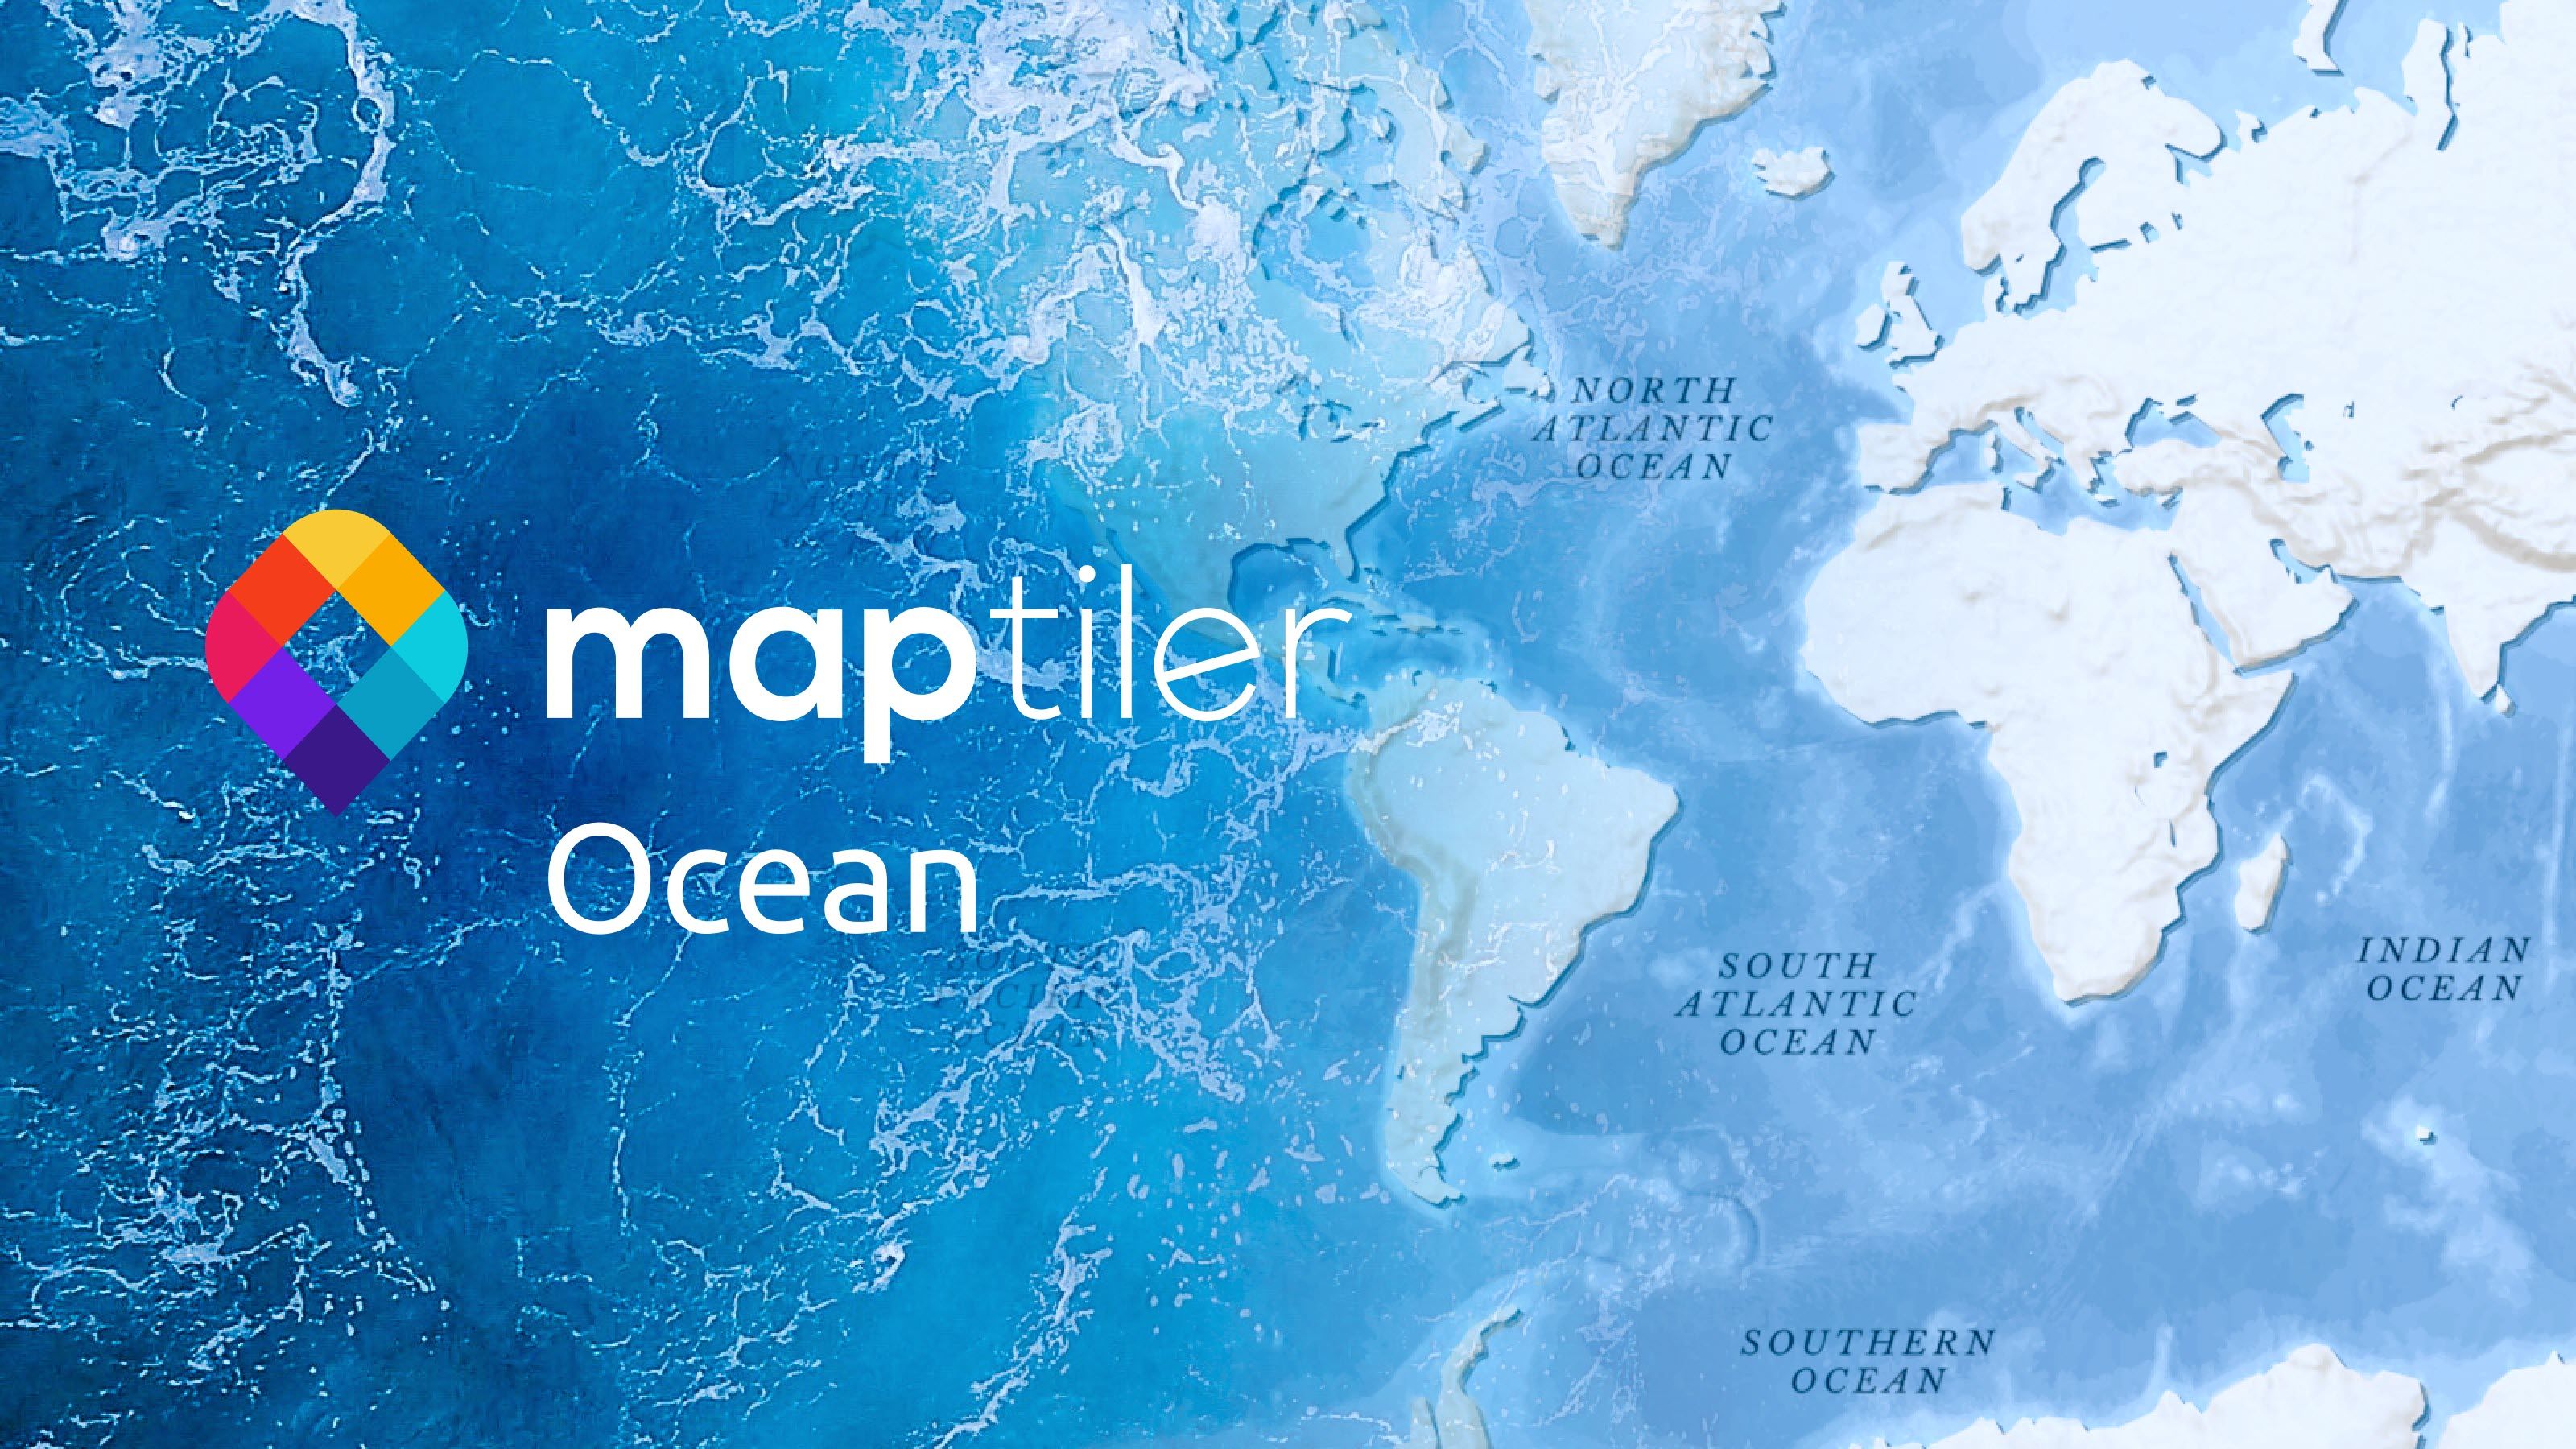 Bathymetry map of the entire world